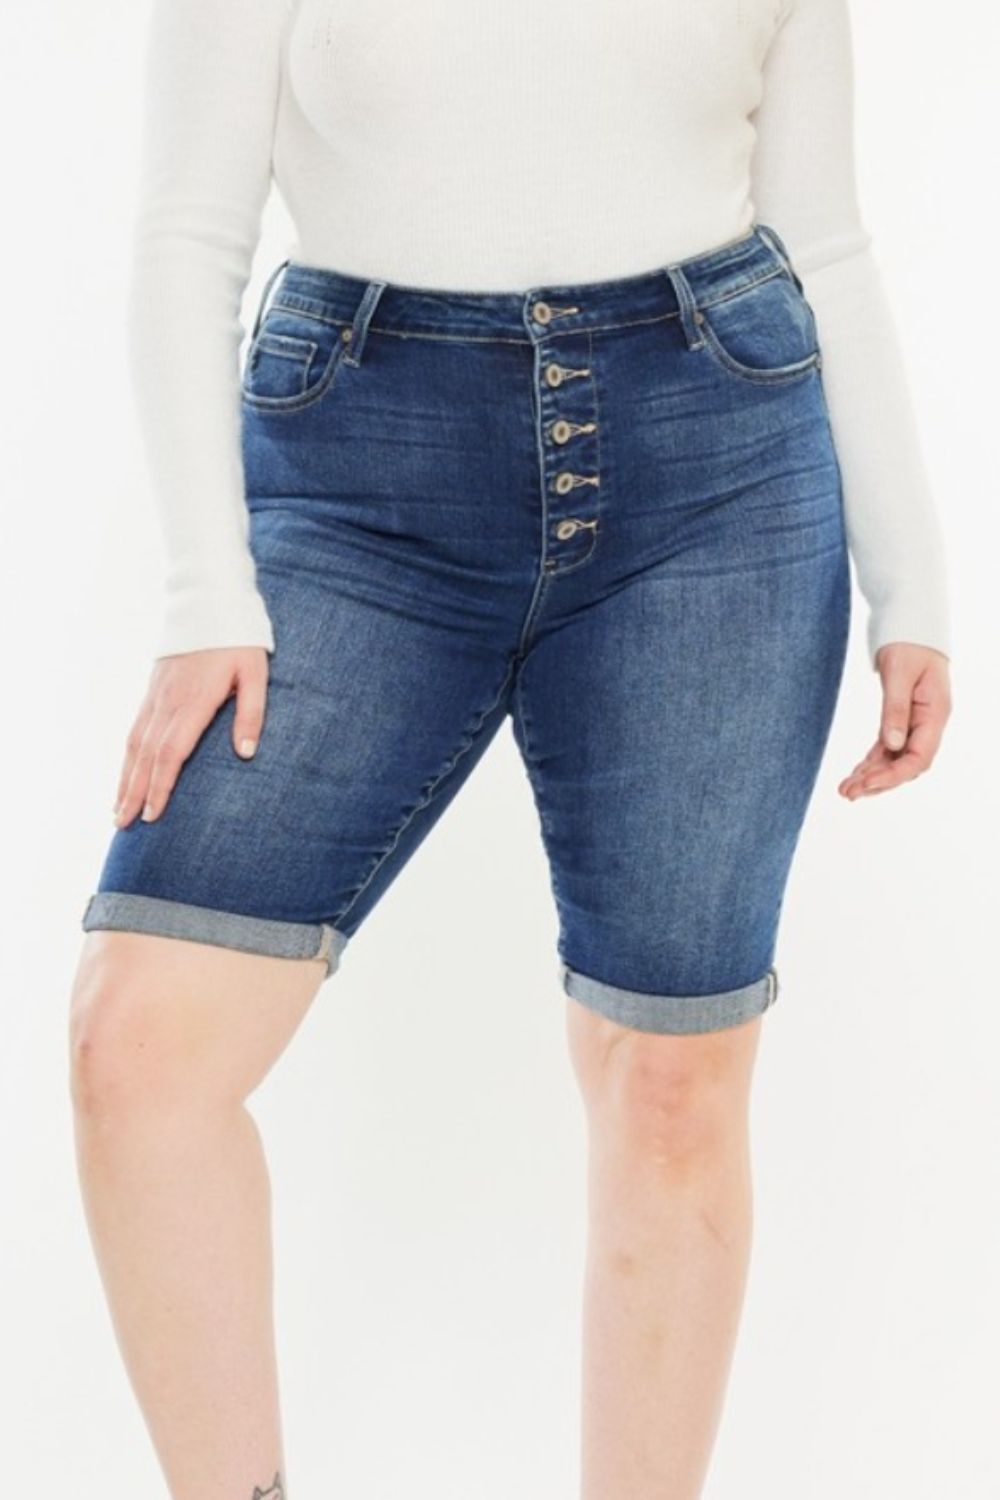 Shop Kancan Denim Shorts with cat's whiskers detail, a stylish button fly, and a versatile fit. Perfect for summer days and nights out